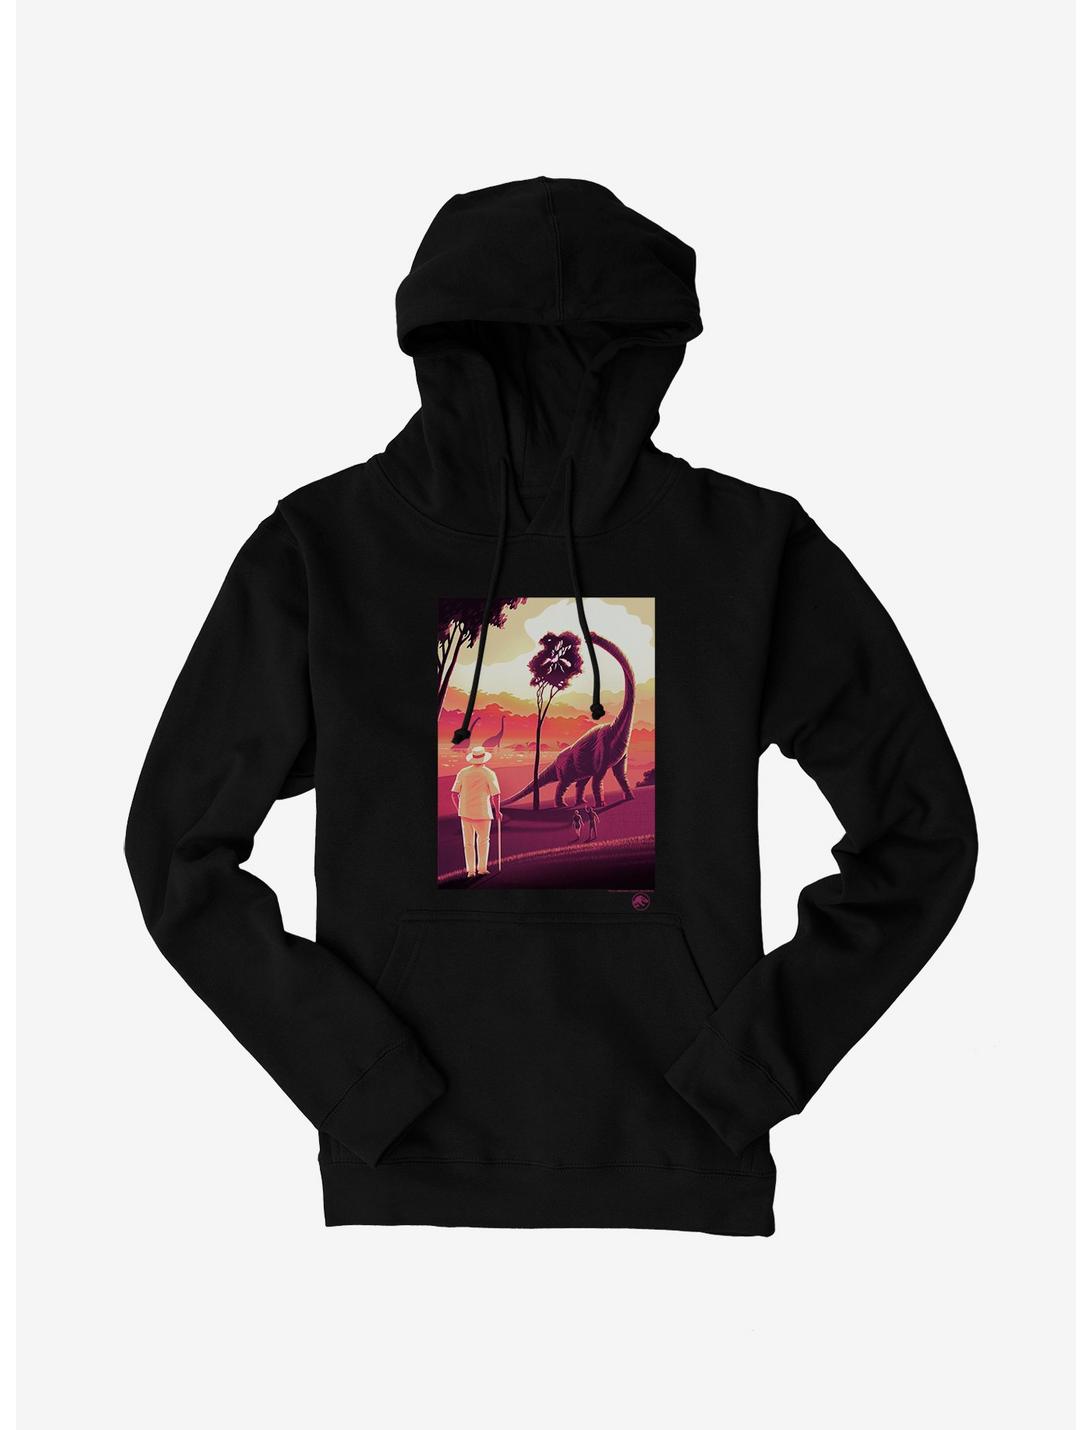 Jurassic World Before The Chaos Hoodie, BLACK, hi-res